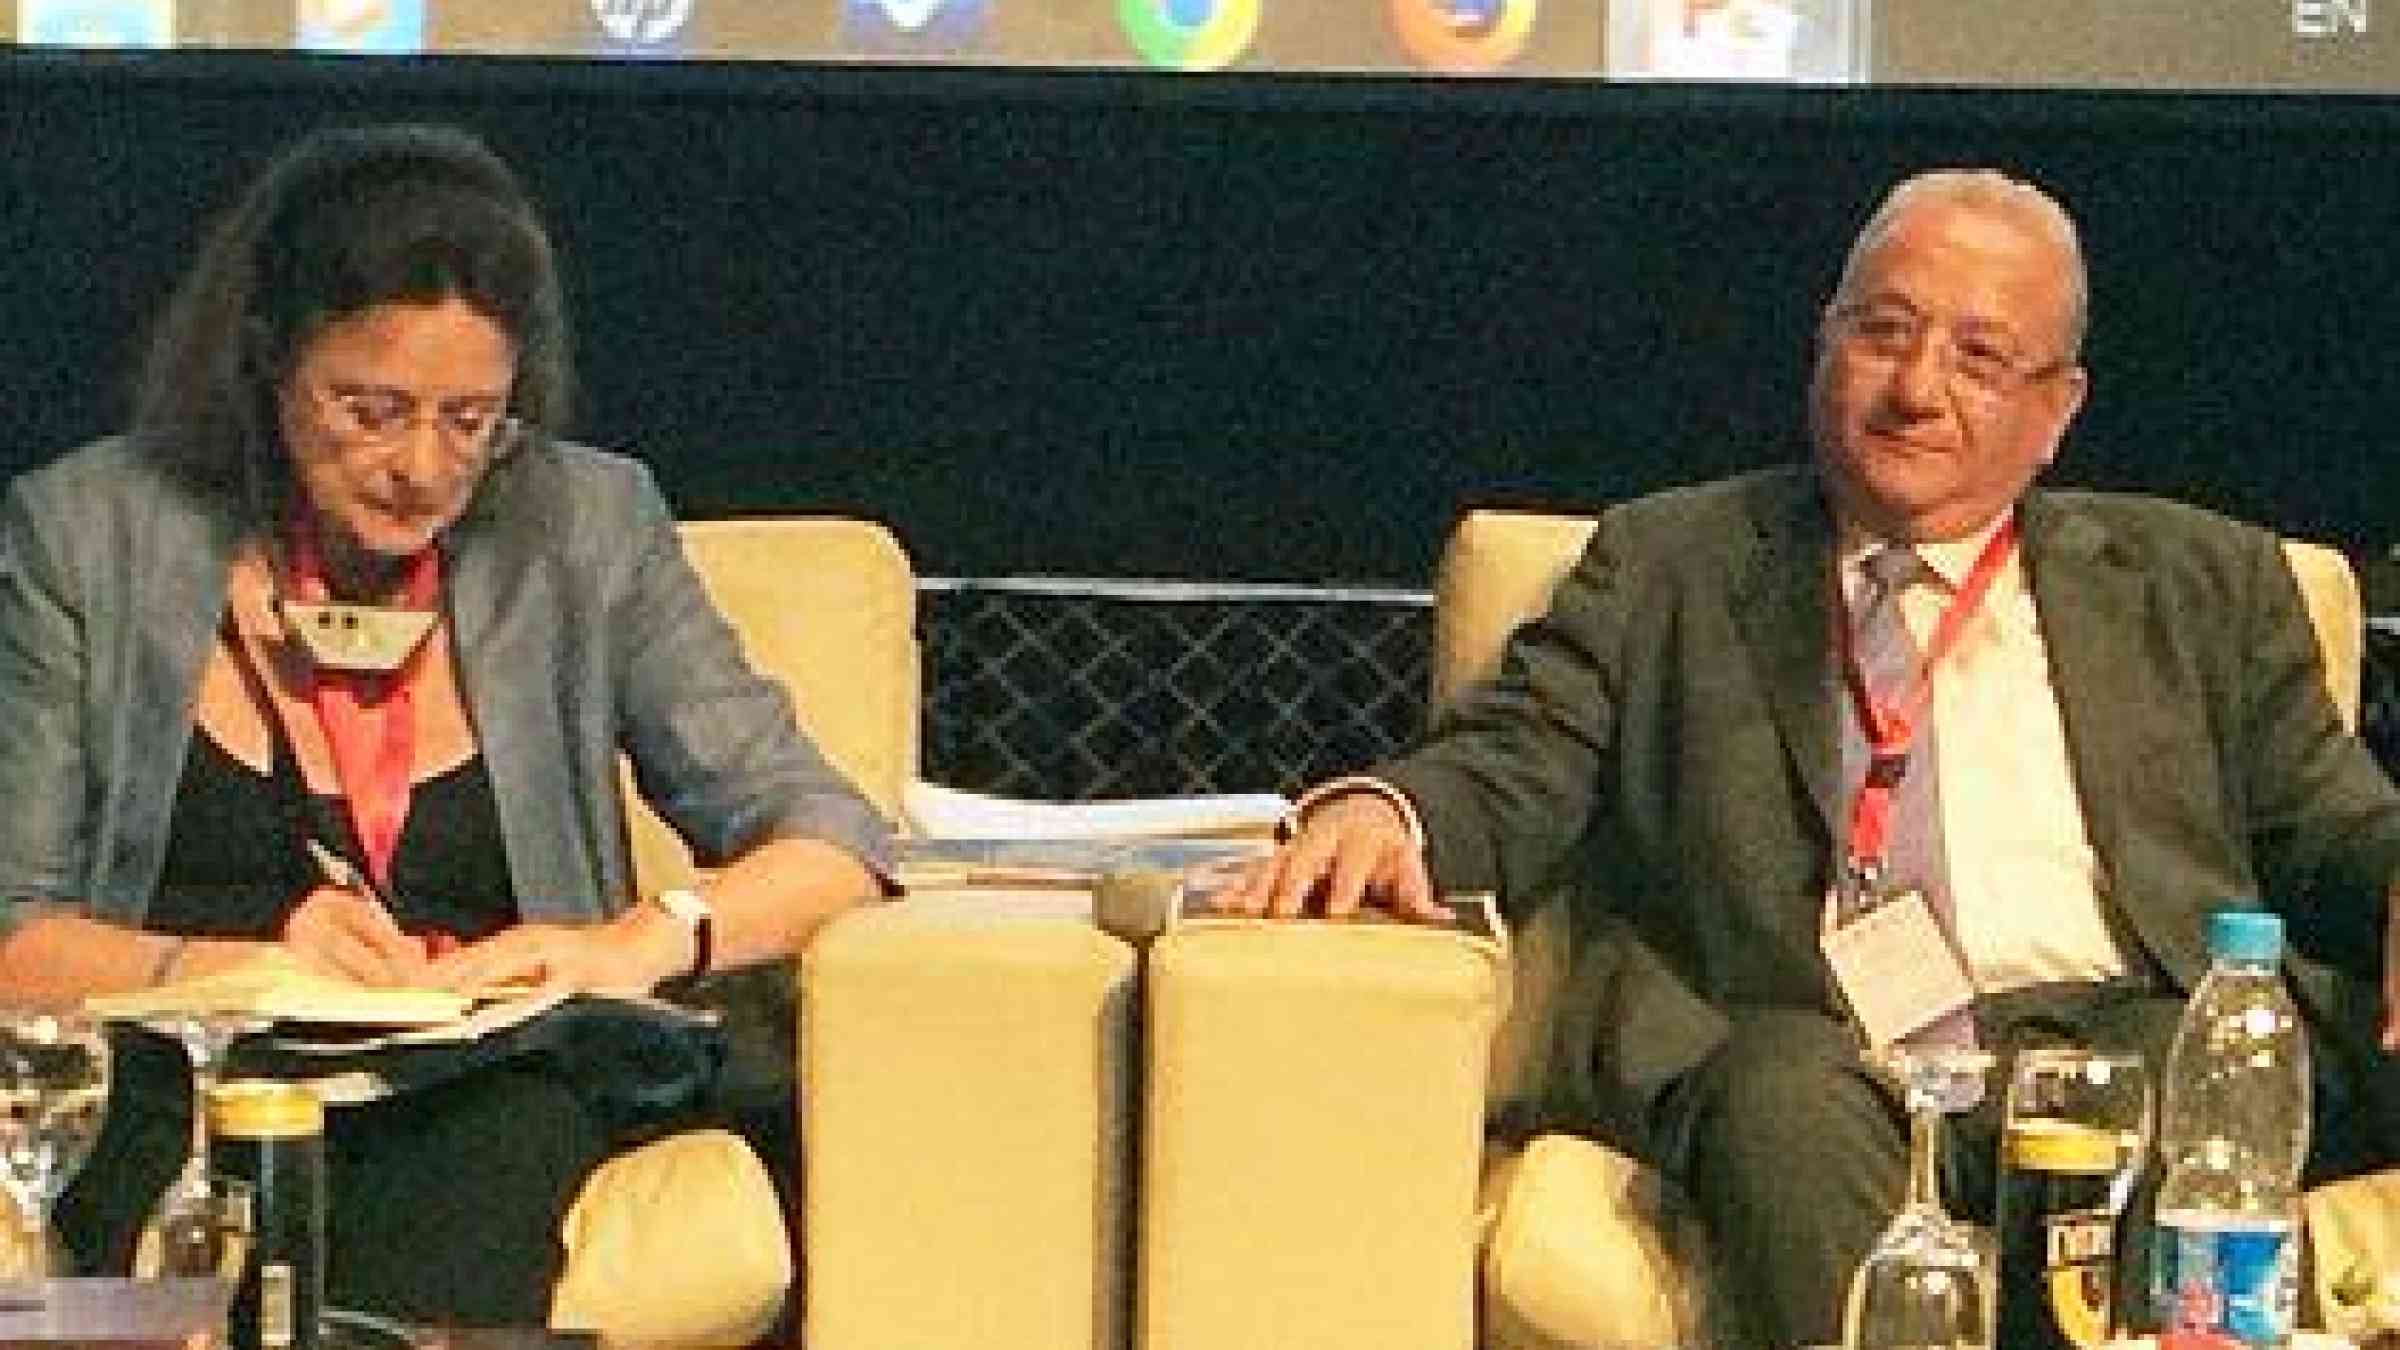 Prof. Virginia Murray, vice-chair, UNISDR Science and Technology Commission, and Prof. Wadid Erian, League of Arab States, spoke on the risks to the Arab region from drought and climate change. (Photo: UNISDR)